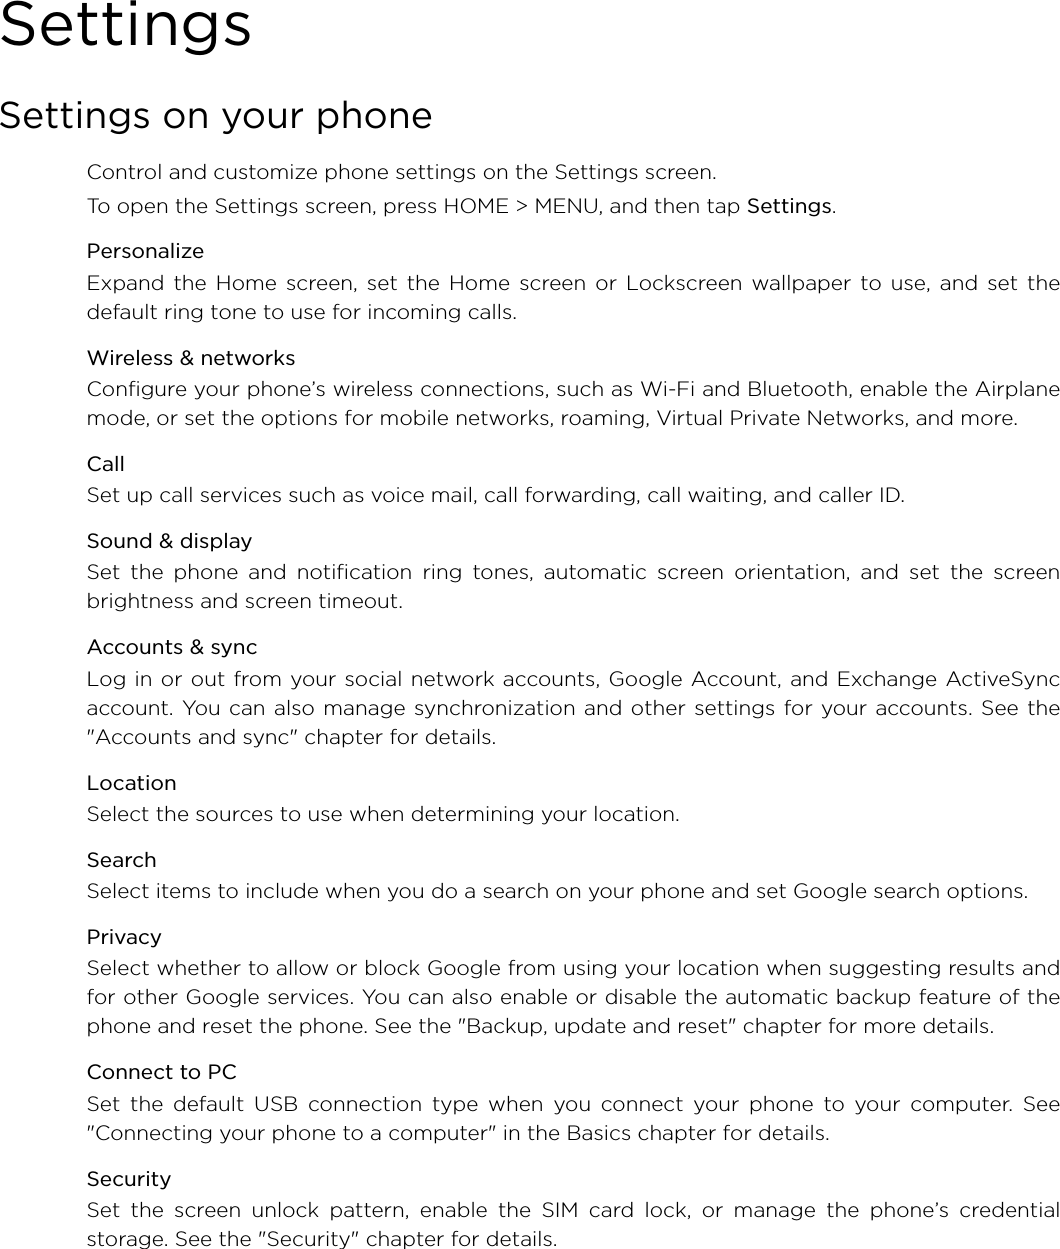 SettingsSettings on your phoneControl and customize phone settings on the Settings screen.To open the Settings screen, press HOME &gt; MENU, and then tap Settings. PersonalizeExpand the Home screen, set the Home screen or Lockscreen wallpaper to use, and set thedefault ring tone to use for incoming calls.Wireless &amp; networksConfigure your phone’s wireless connections, such as Wi-Fi and Bluetooth, enable the Airplanemode, or set the options for mobile networks, roaming, Virtual Private Networks, and more.CallSet up call services such as voice mail, call forwarding, call waiting, and caller ID.Sound &amp; displaySet the phone and notification ring tones, automatic screen orientation, and set the screenbrightness and screen timeout.Accounts &amp; syncLog in or out from your social network accounts, Google Account, and Exchange ActiveSyncaccount. You can also manage synchronization and other settings for your accounts. See the&quot;Accounts and sync&quot; chapter for details. LocationSelect the sources to use when determining your location.SearchSelect items to include when you do a search on your phone and set Google search options. PrivacySelect whether to allow or block Google from using your location when suggesting results andfor other Google services. You can also enable or disable the automatic backup feature of thephone and reset the phone. See the &quot;Backup, update and reset&quot; chapter for more details.Connect to PCSet the default USB connection type when you connect your phone to your computer. See&quot;Connecting your phone to a computer&quot; in the Basics chapter for details.SecuritySet the screen unlock pattern, enable the SIM card lock, or manage the phone’s credentialstorage. See the &quot;Security&quot; chapter for details.